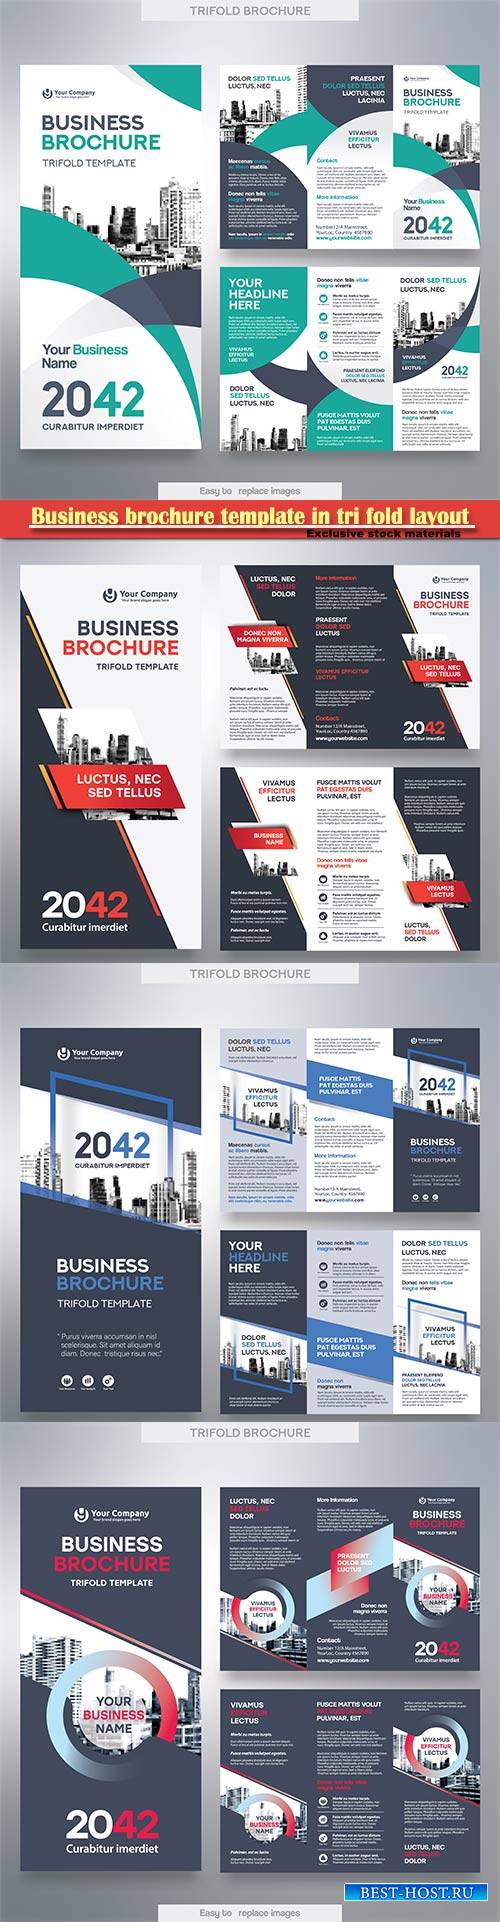 Business brochure template in tri fold layout, corporate design vector illustration